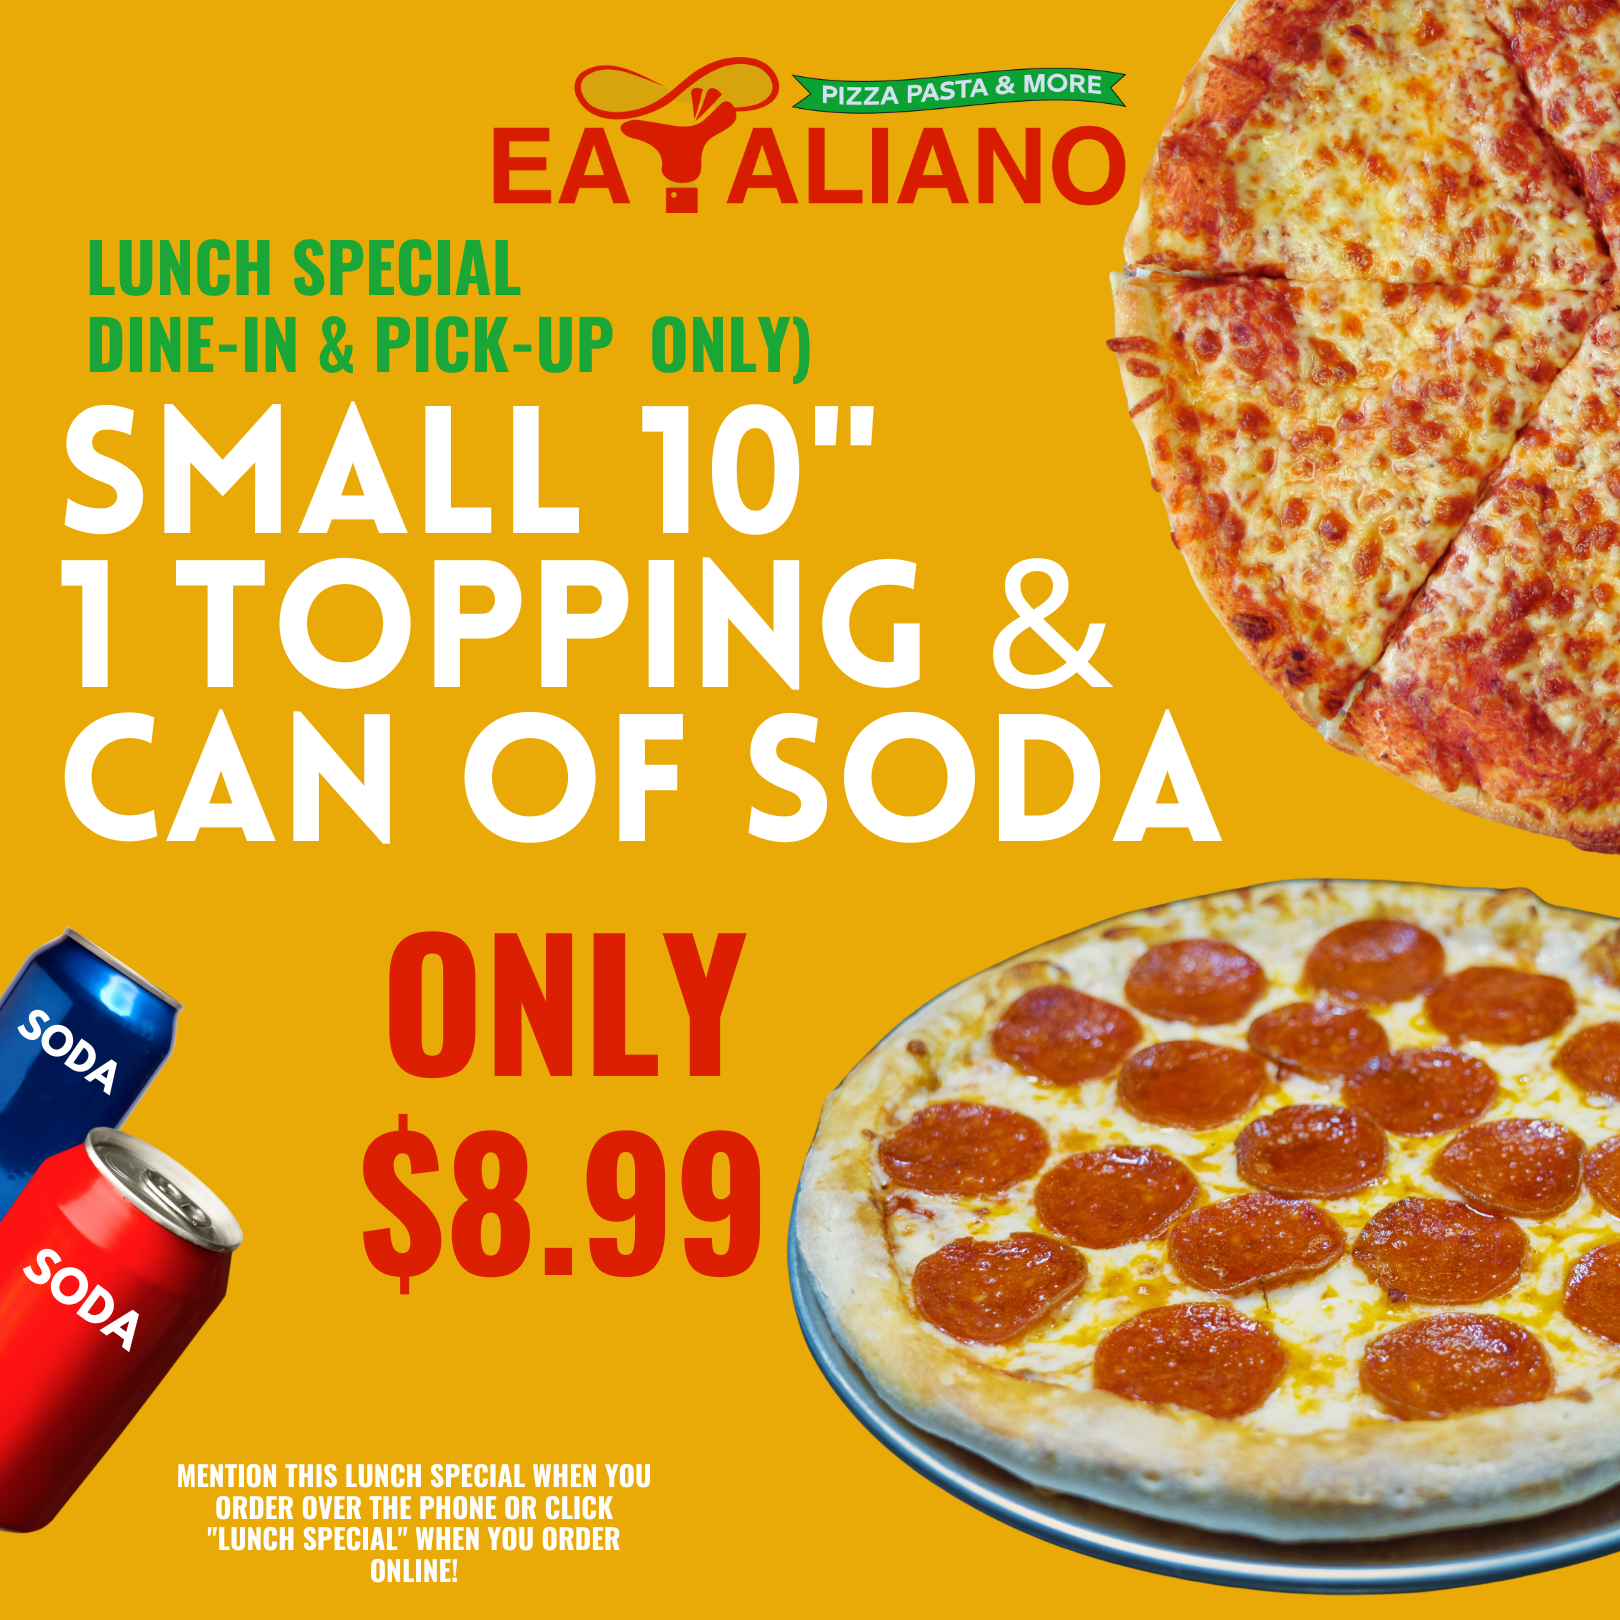 Small 10" 1 Topping & Can of Soda  $8.99